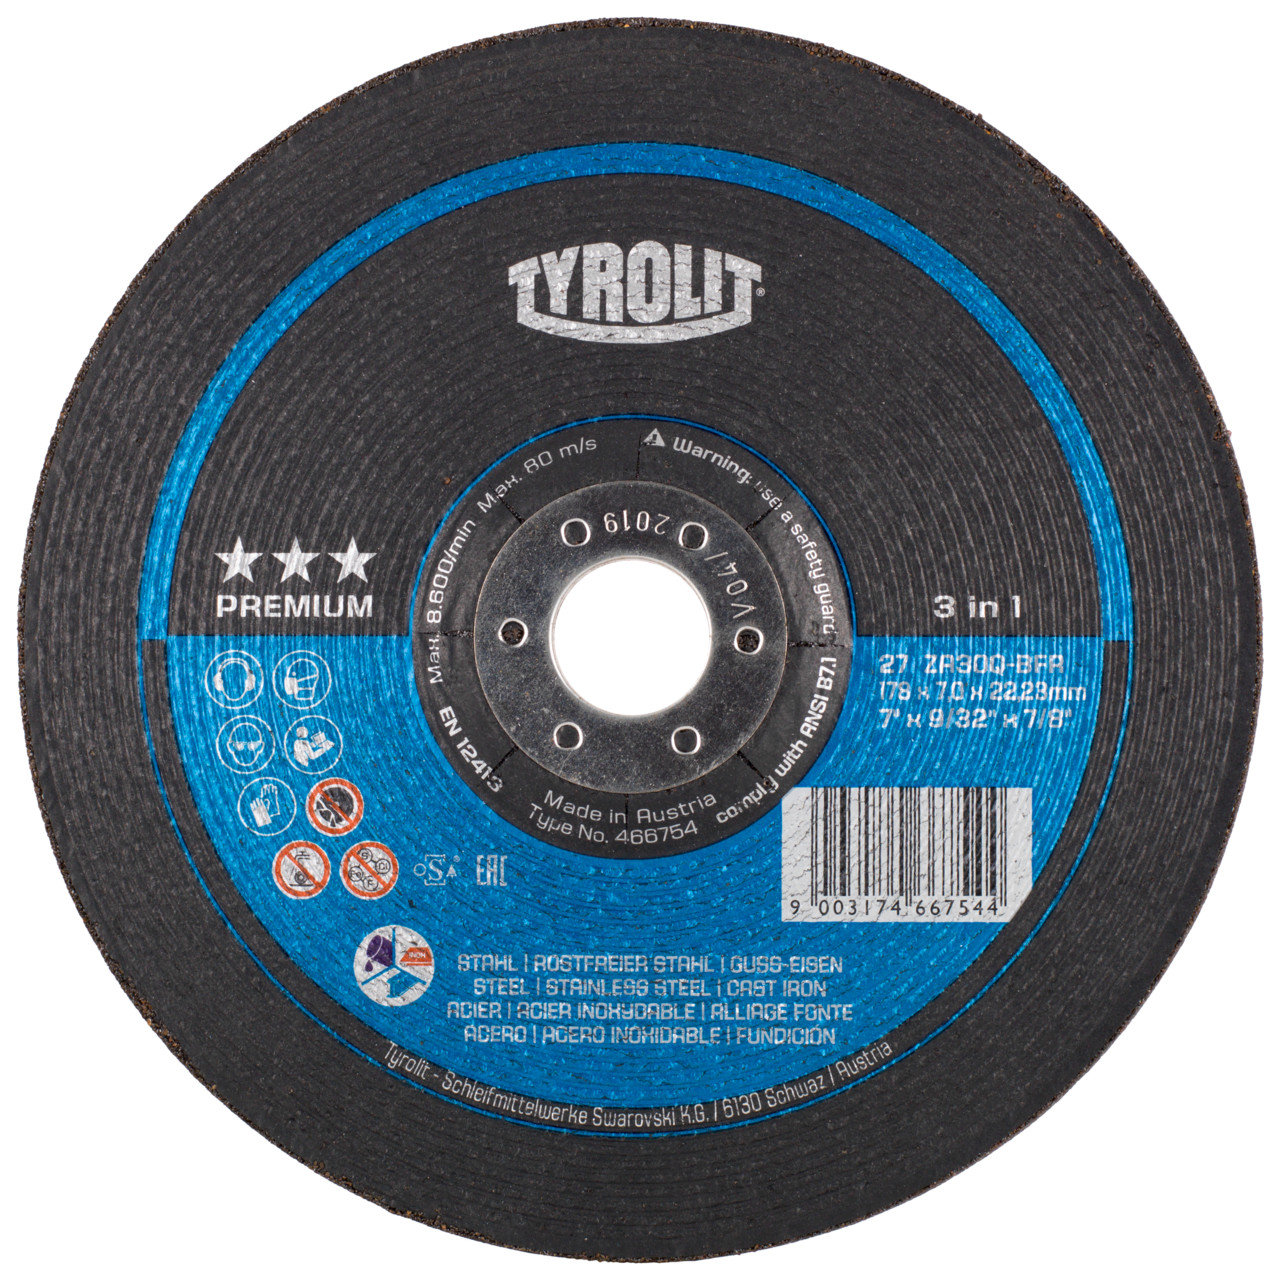 Tyrolit Roughing disc DxUxH 230x7x22.23 3in1 for steel and stainless steel and cast iron, shape: 27 - offset version, Art. 466762